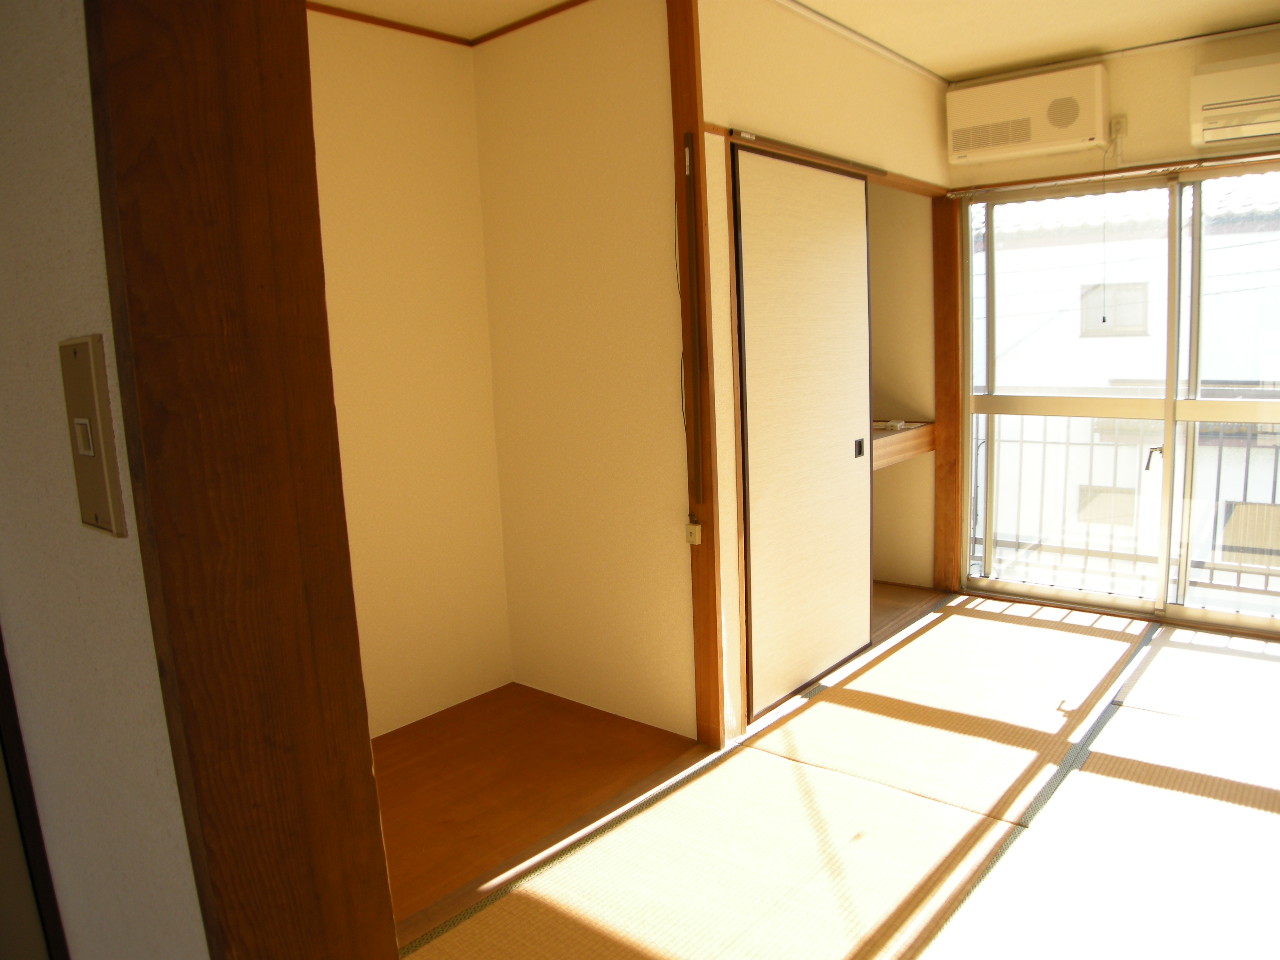 Living and room. Housed between the Japanese-style room 1